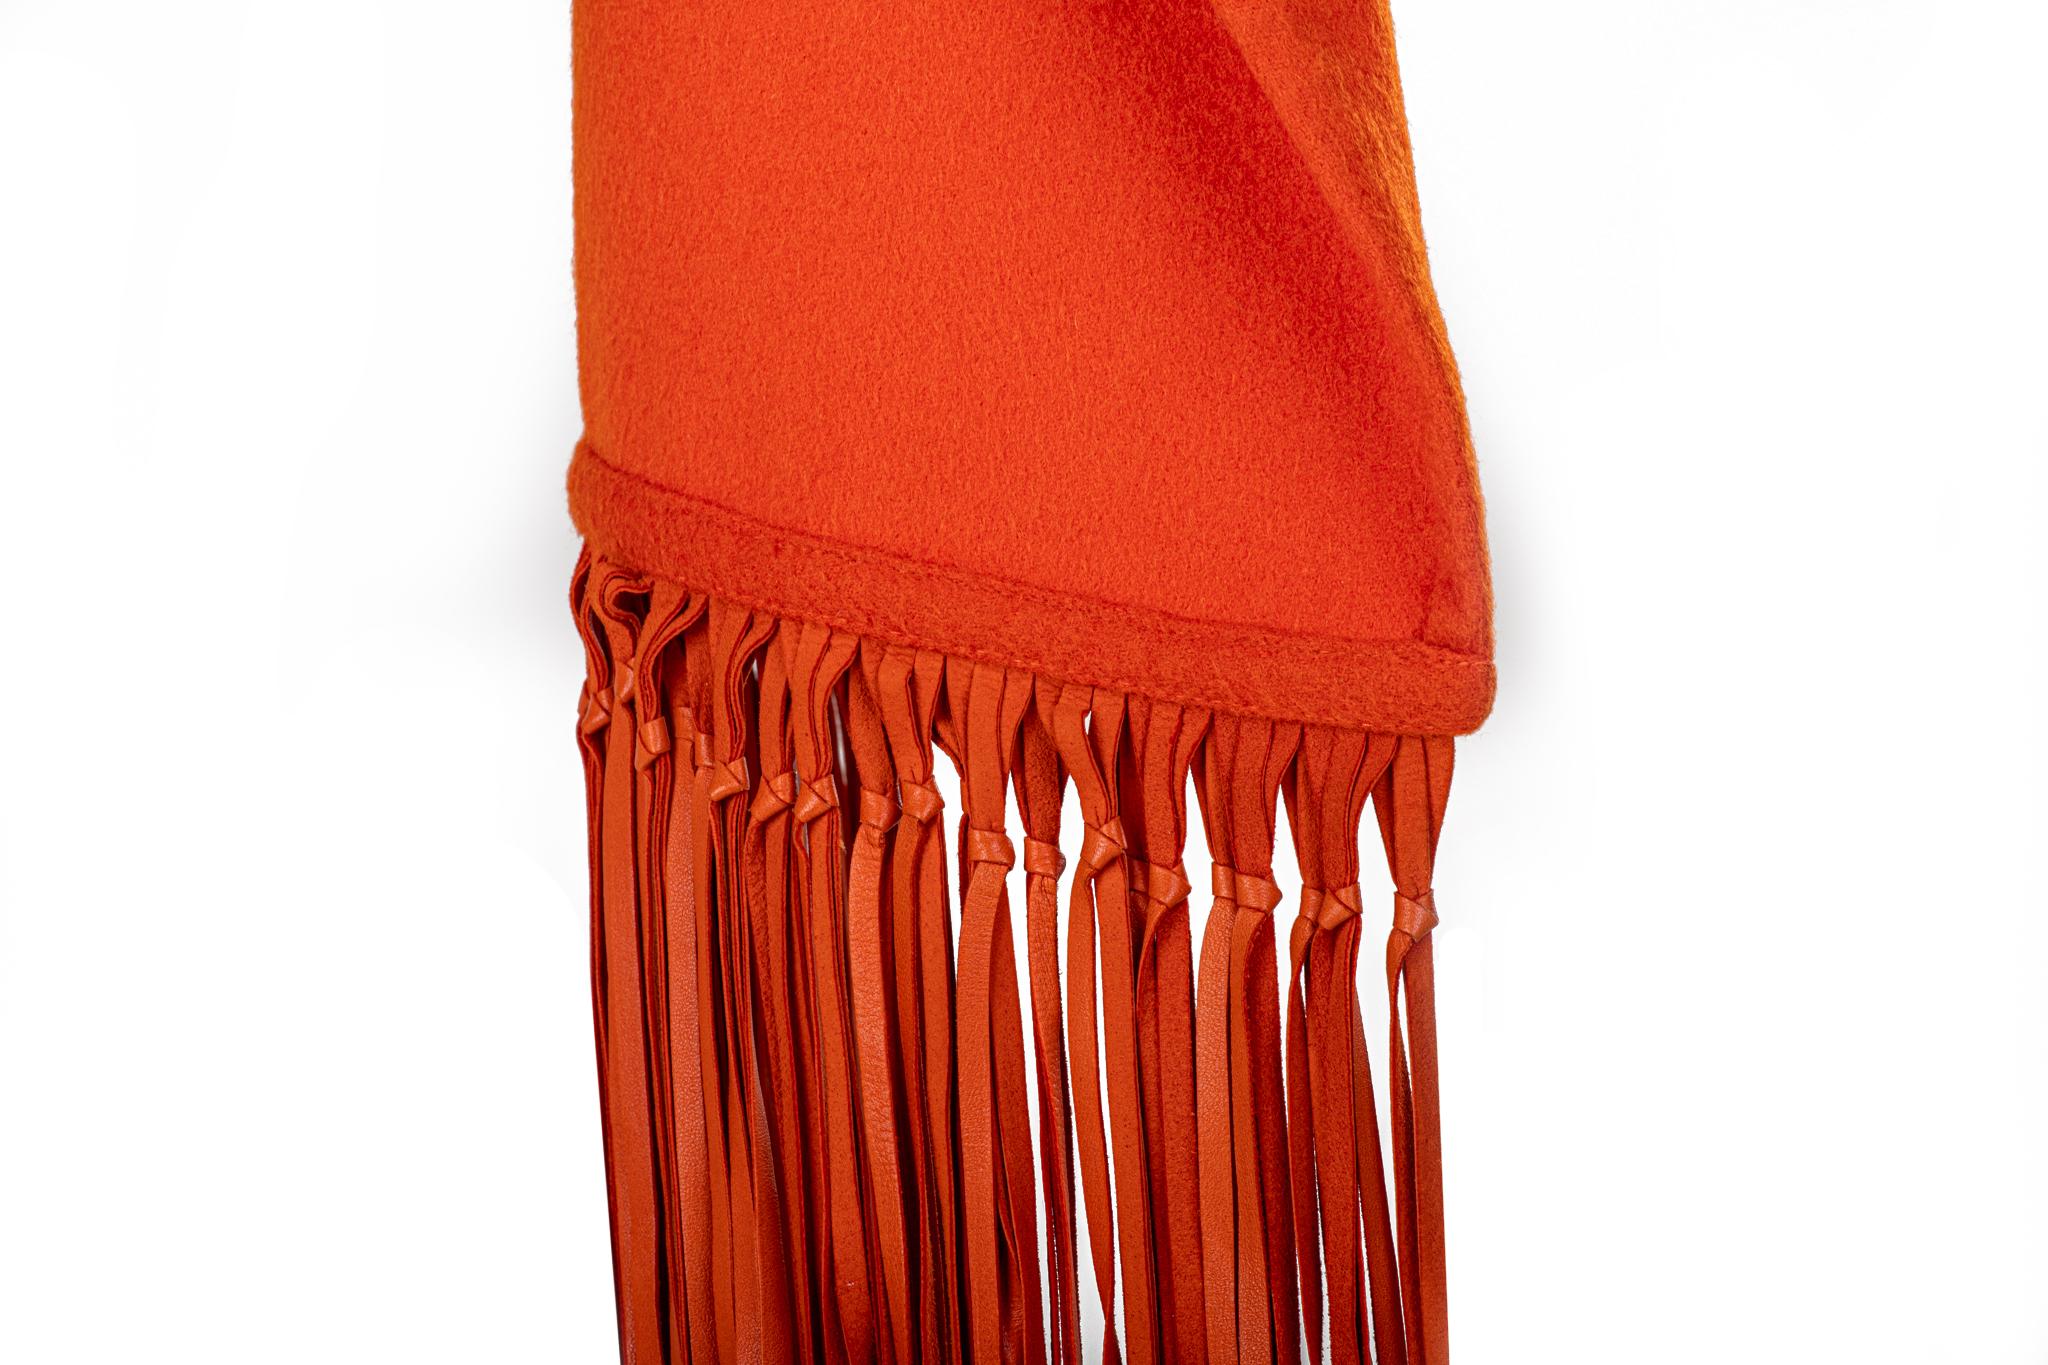 Hermès Orange Cashmere Leather Scarf In Excellent Condition For Sale In West Hollywood, CA